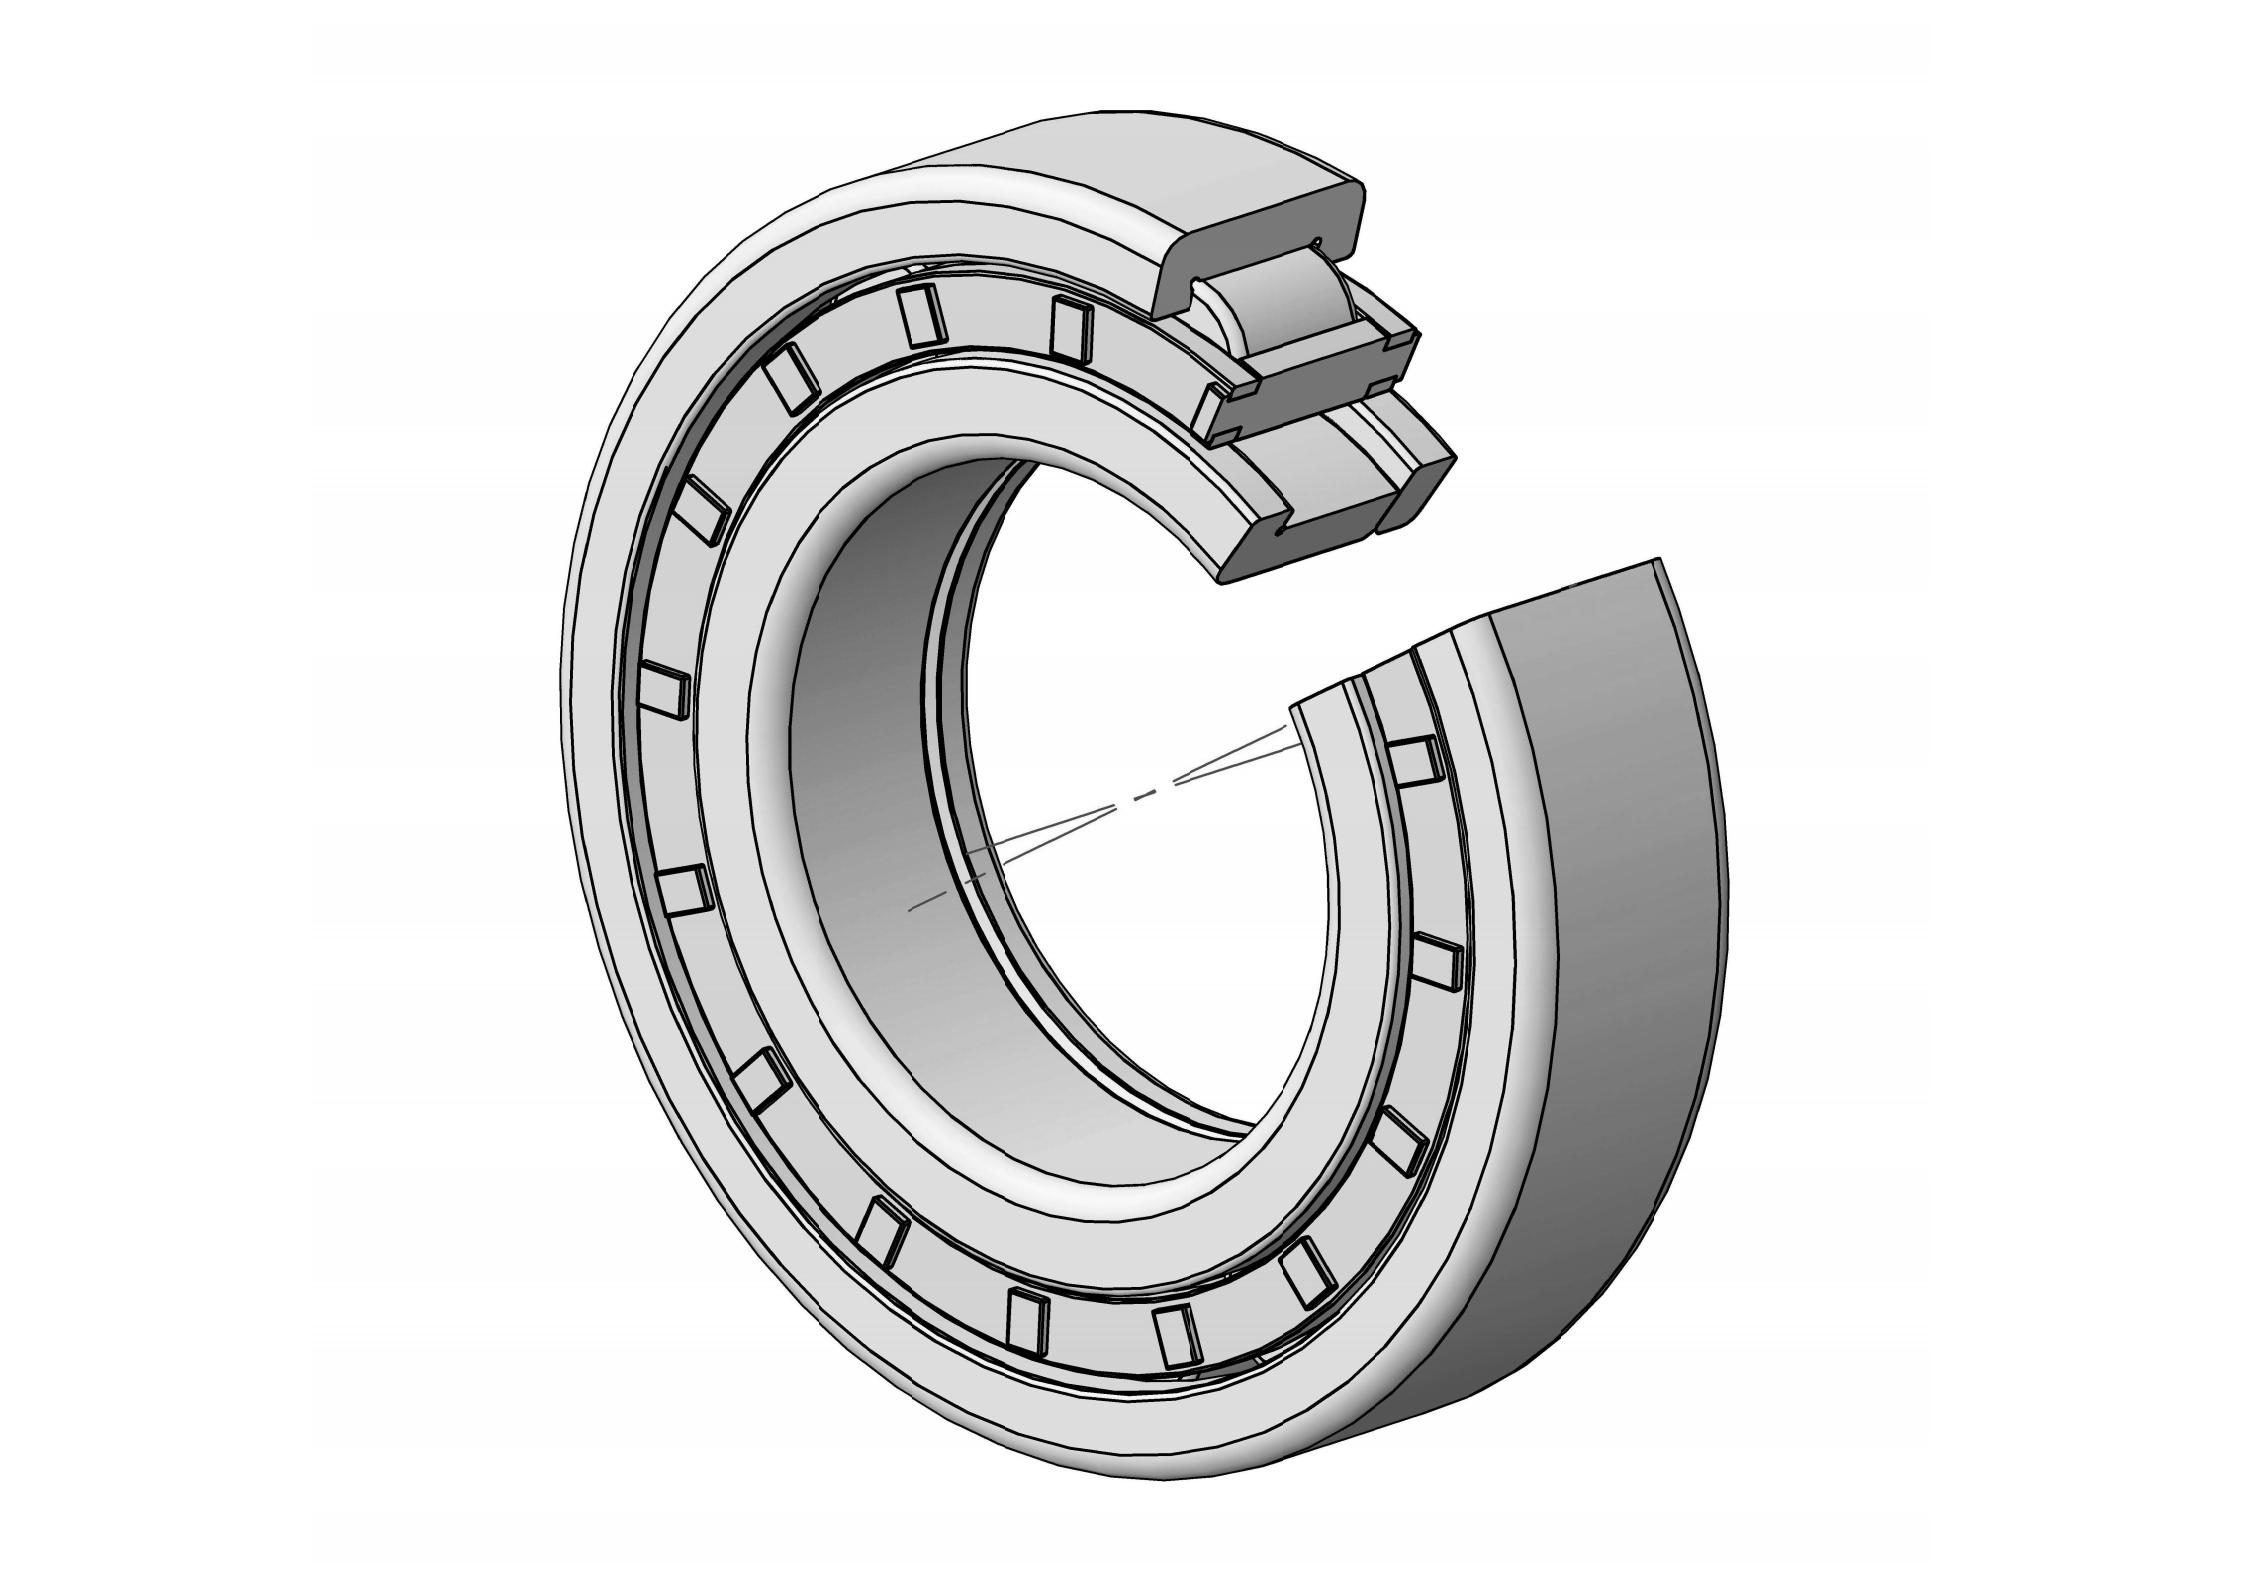 NUP2205-E Single Row Cylindrical roller bearing 